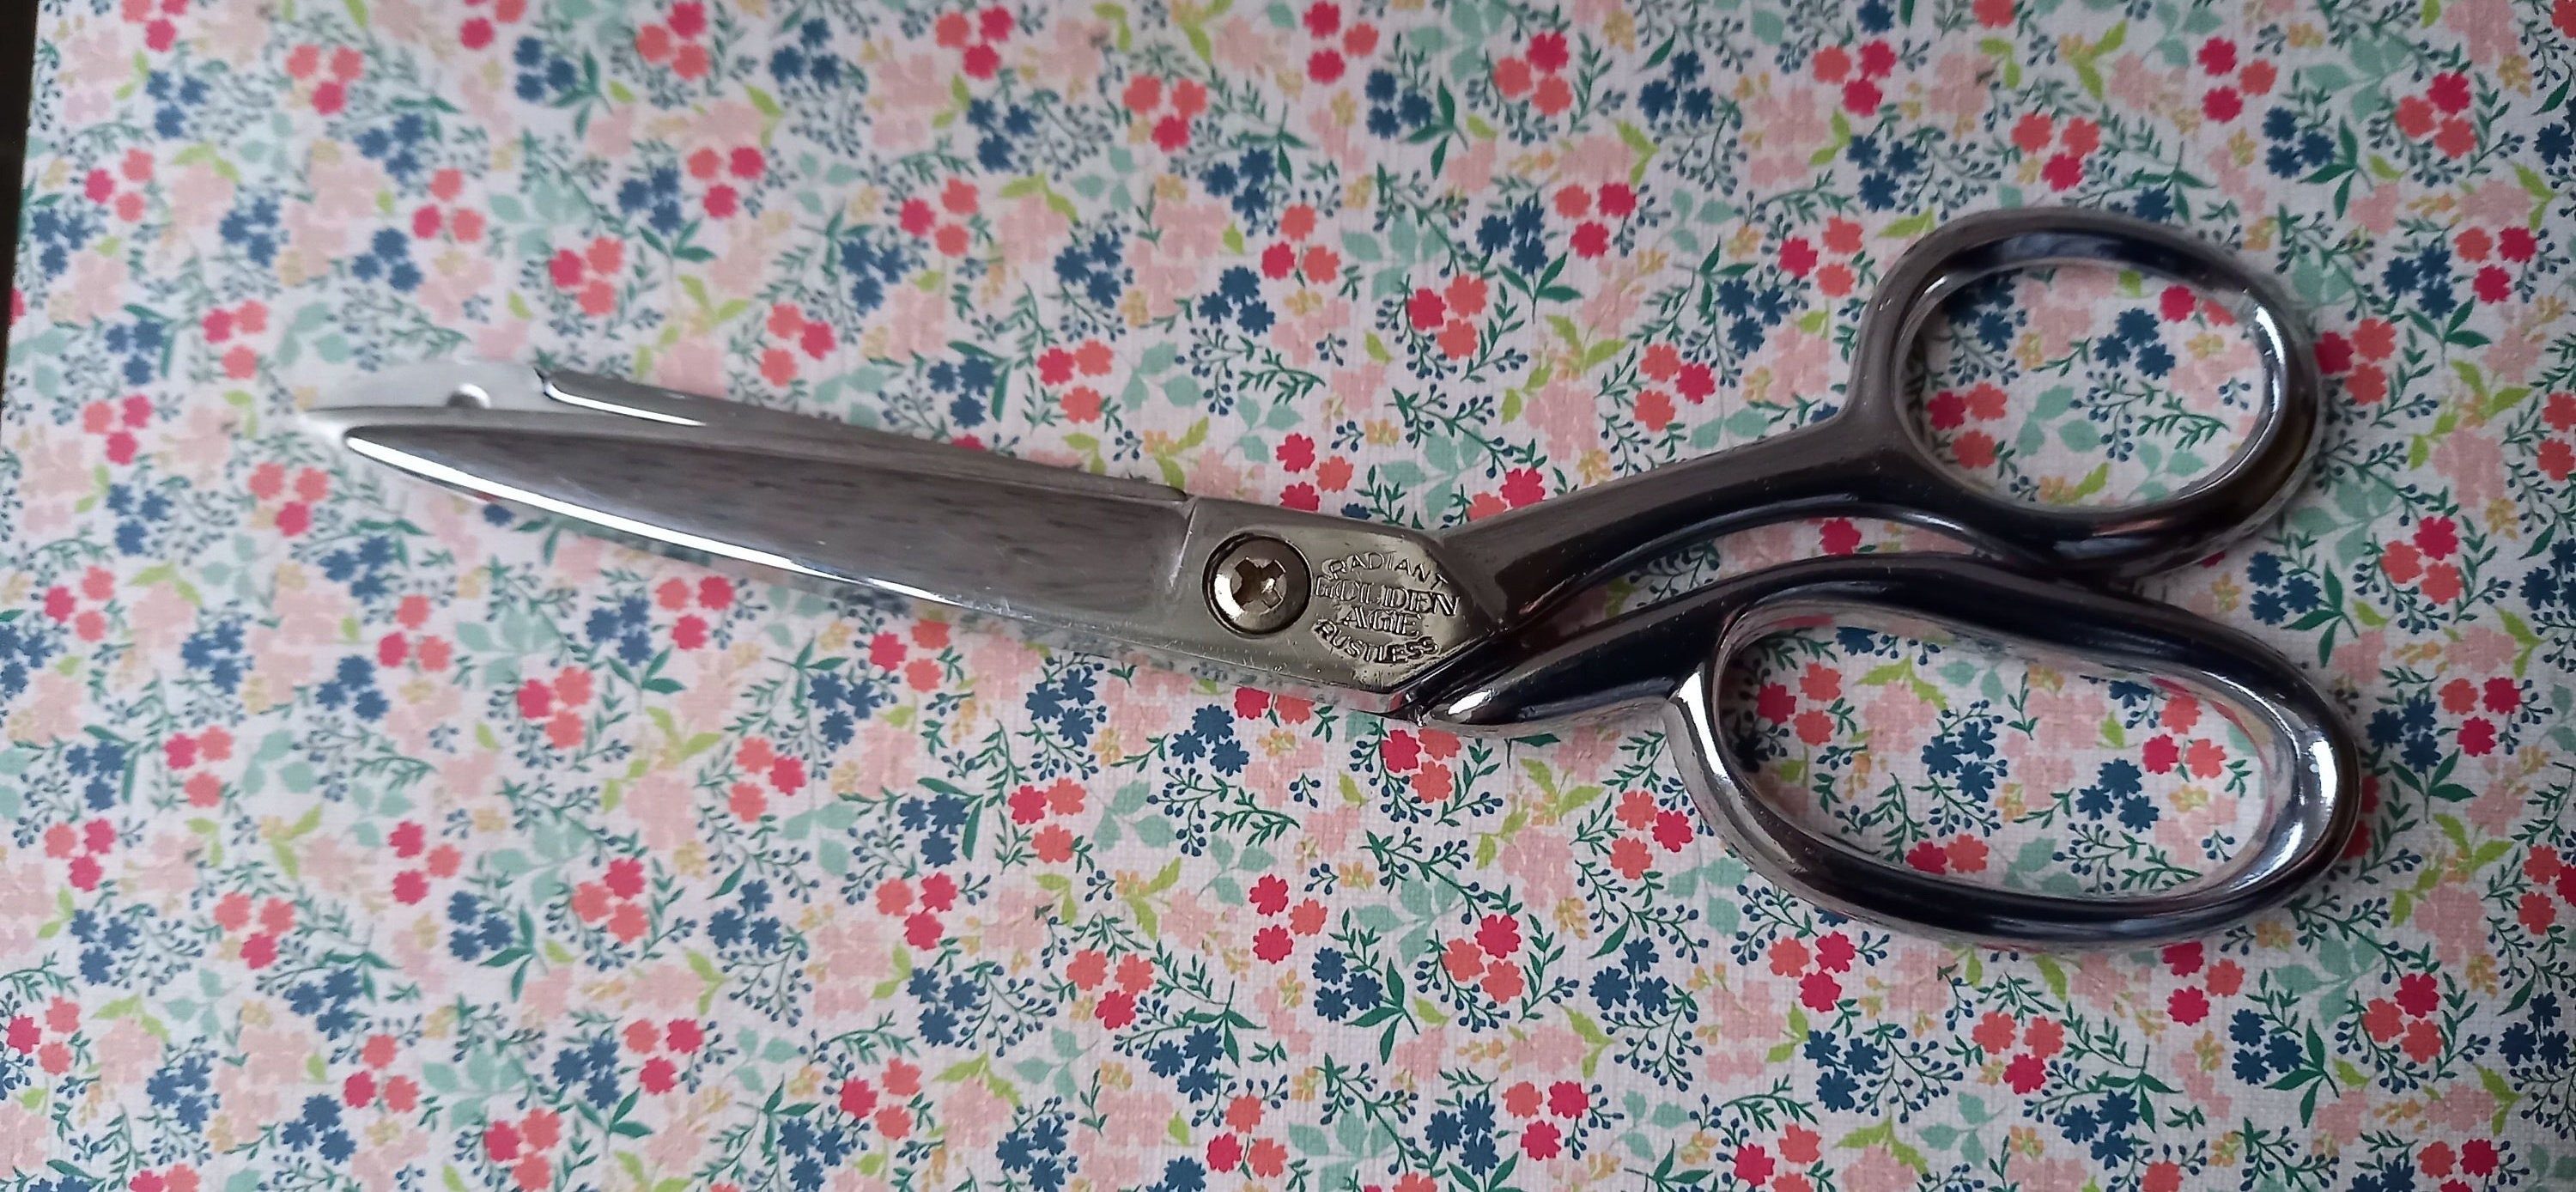 10 Inch Chrome Tailoring Shears High Quality Atelier Notions Sewing  Supplies Gingher Trimmer Scissors Dressmaker Fabric Cutting Custom 